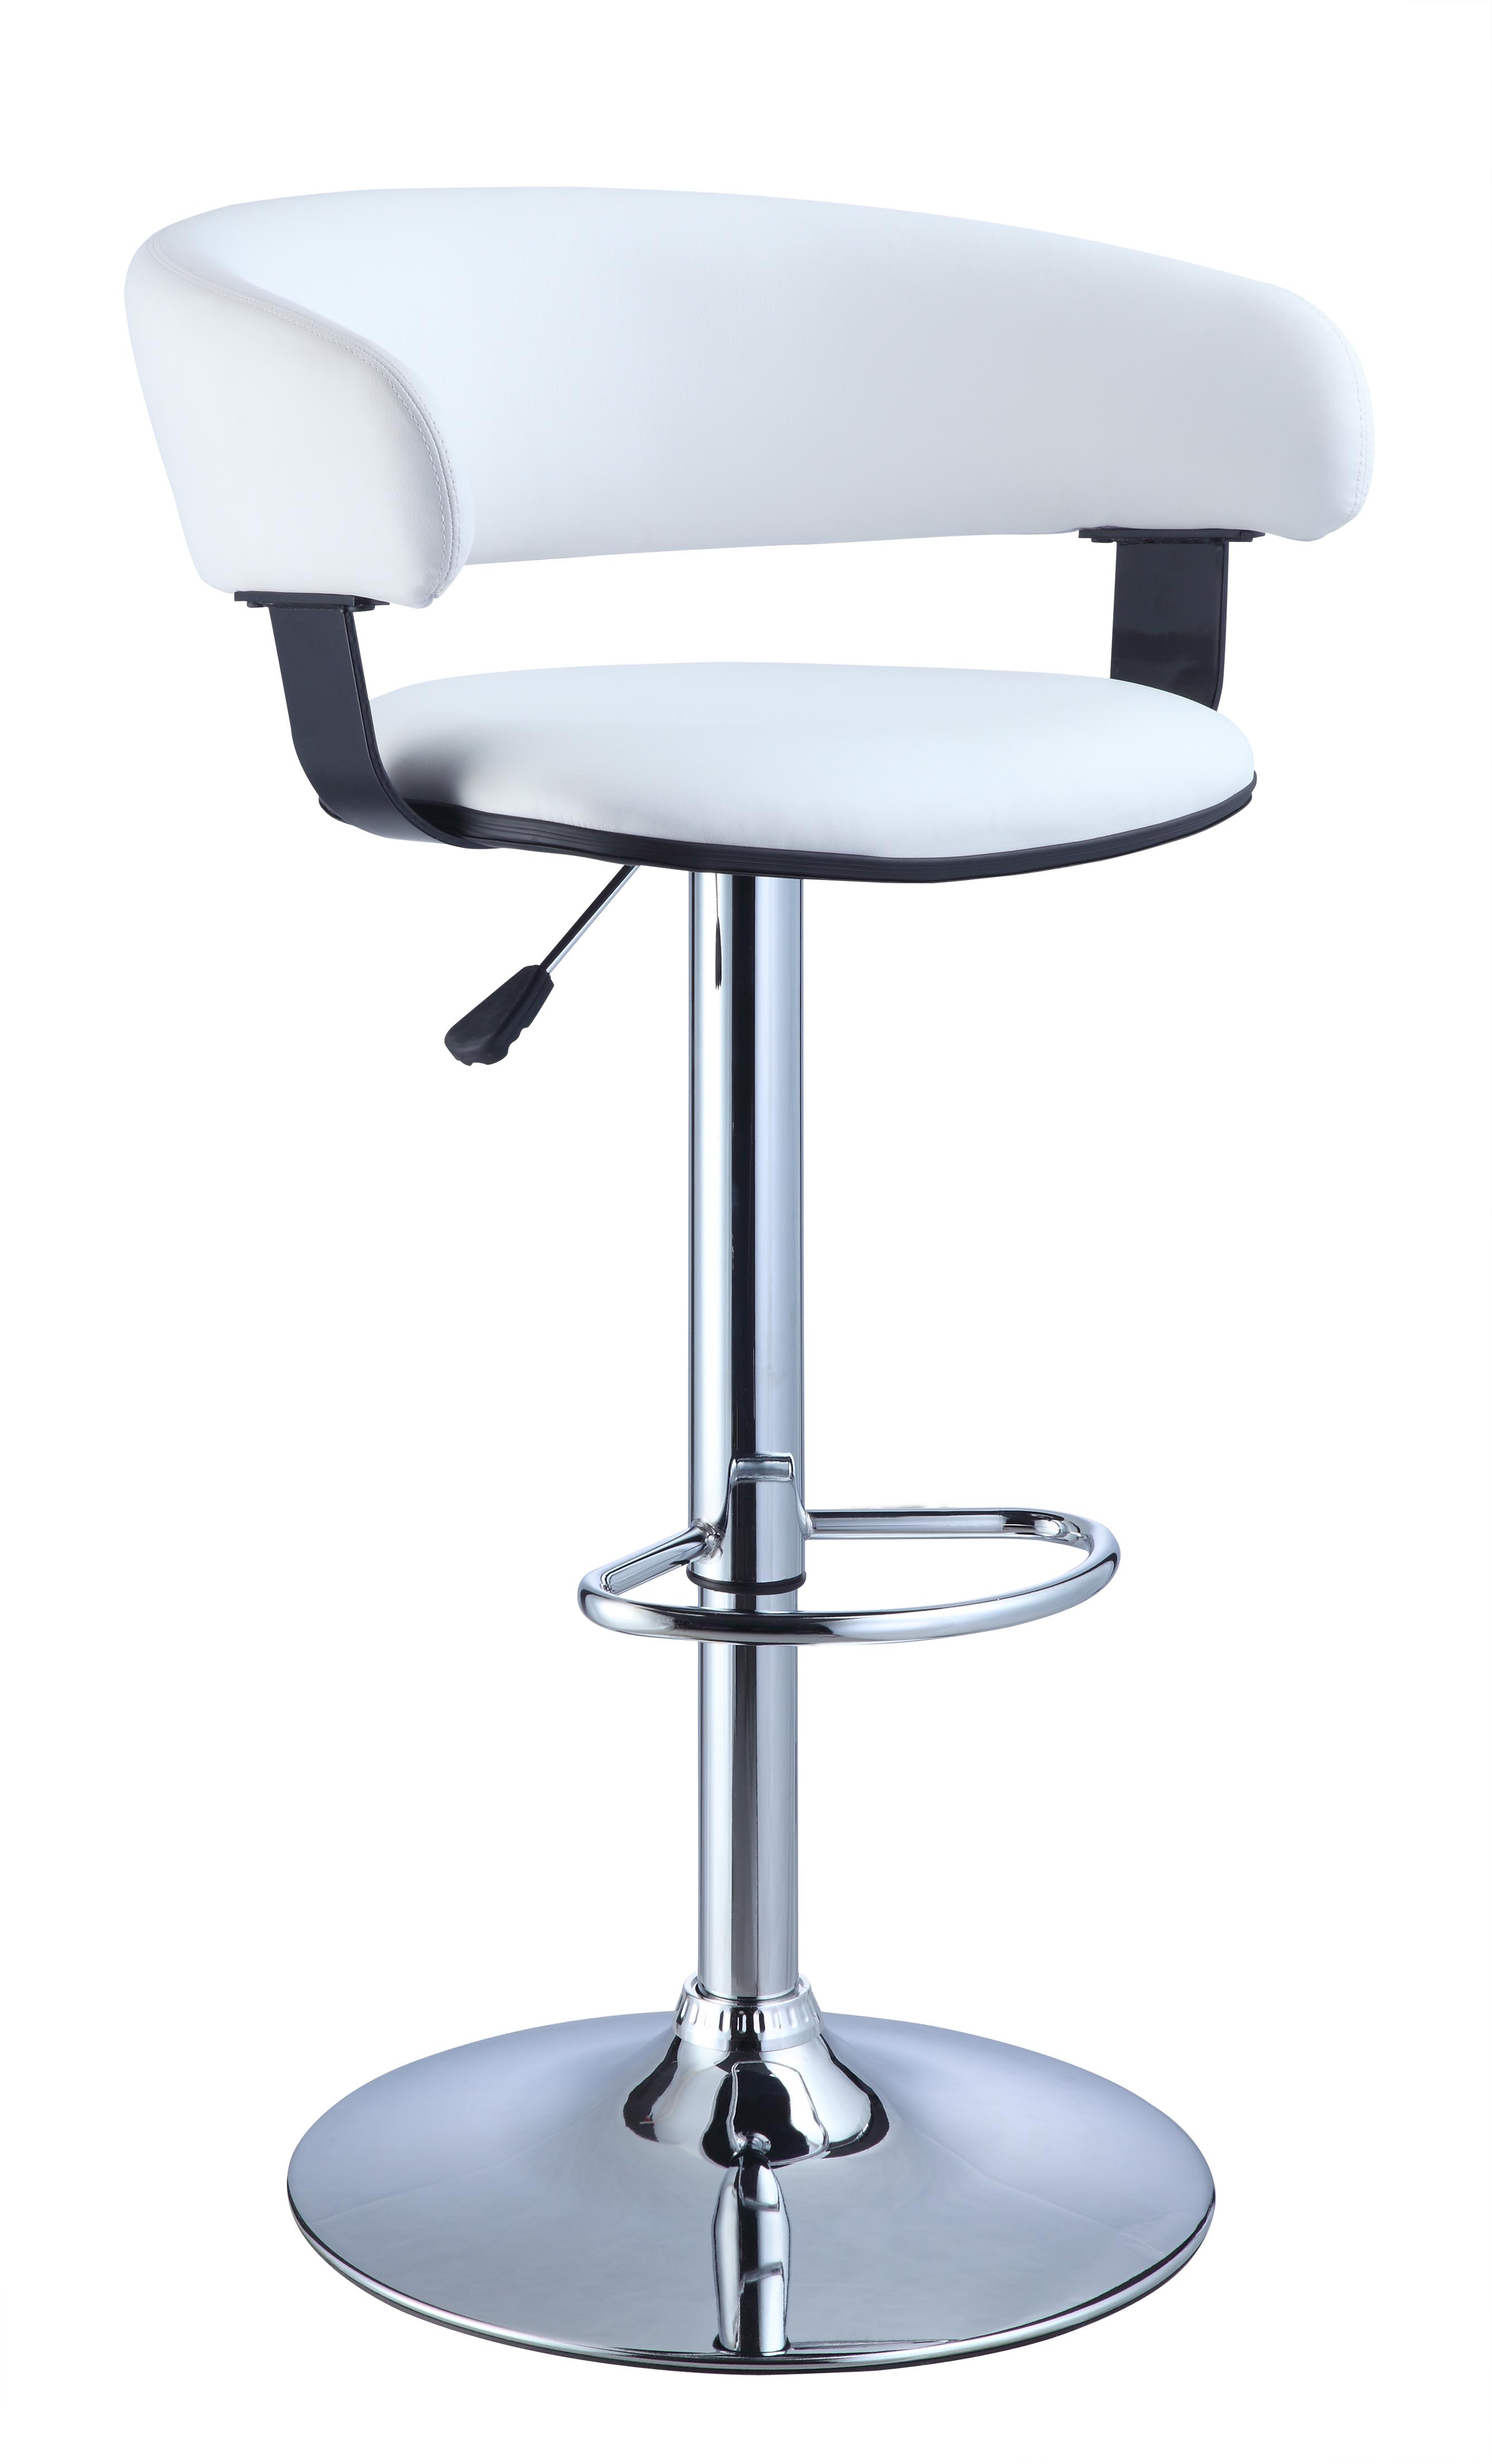 L Powell White Faux Leather Barrel & Chrome Adjustable Height Bar Stool